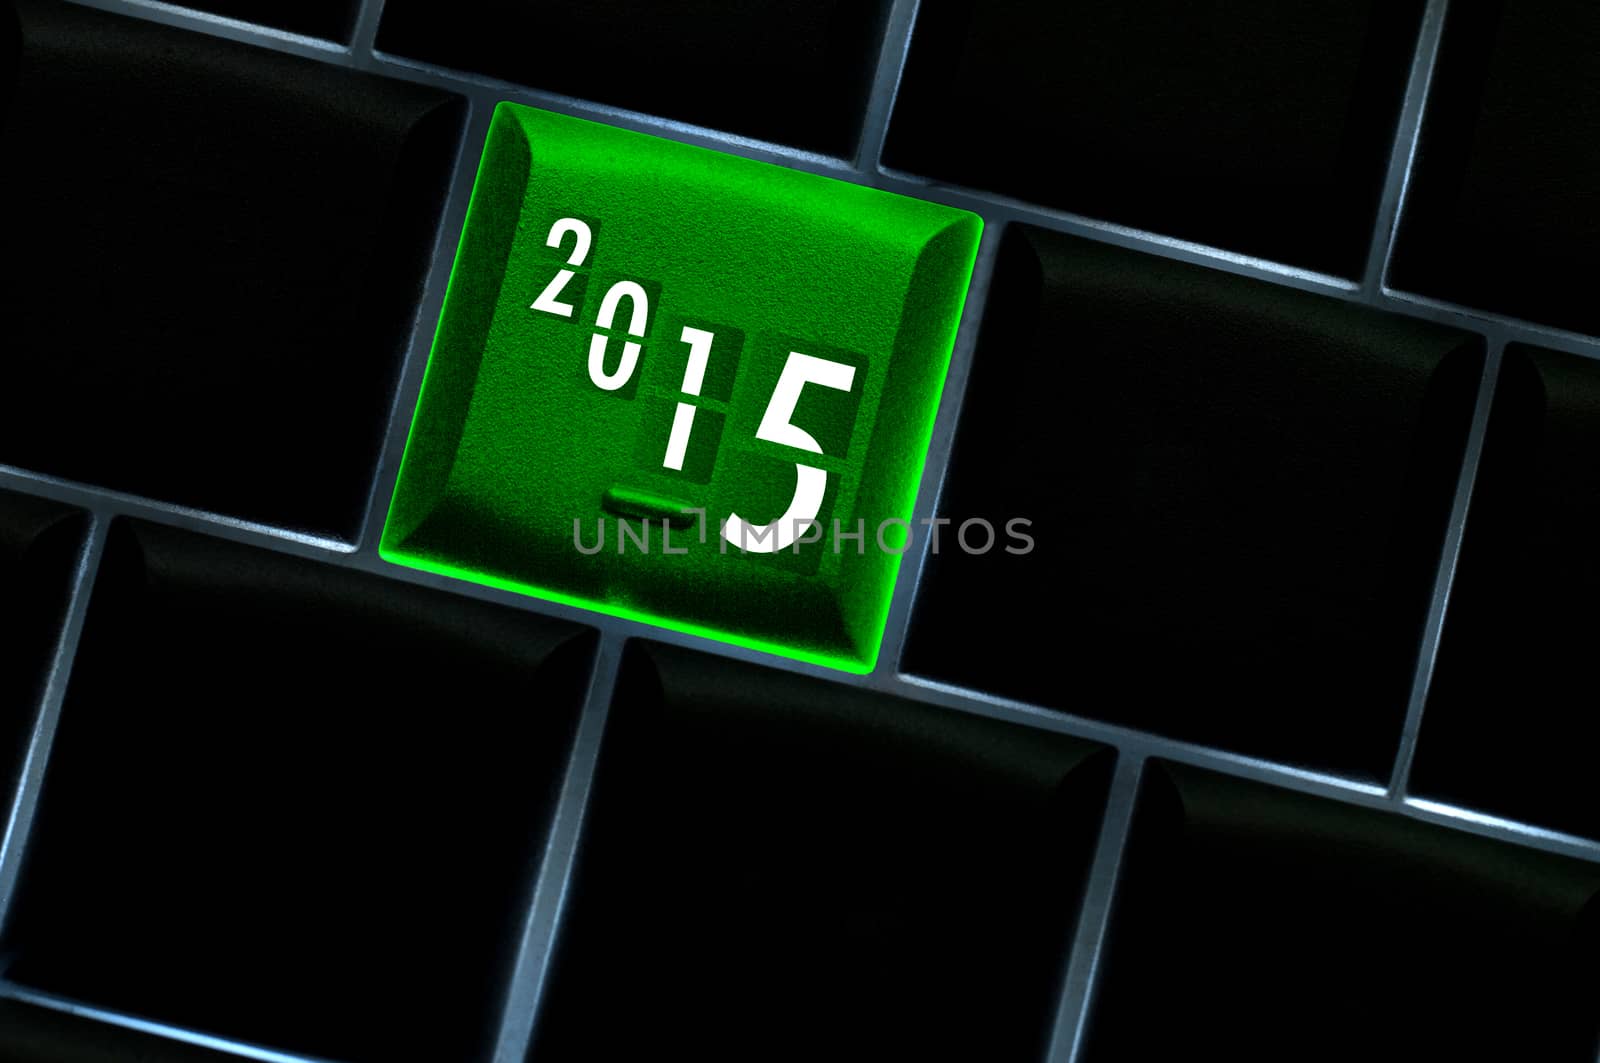 New year countdown 2015 Concept with back lit keyboard